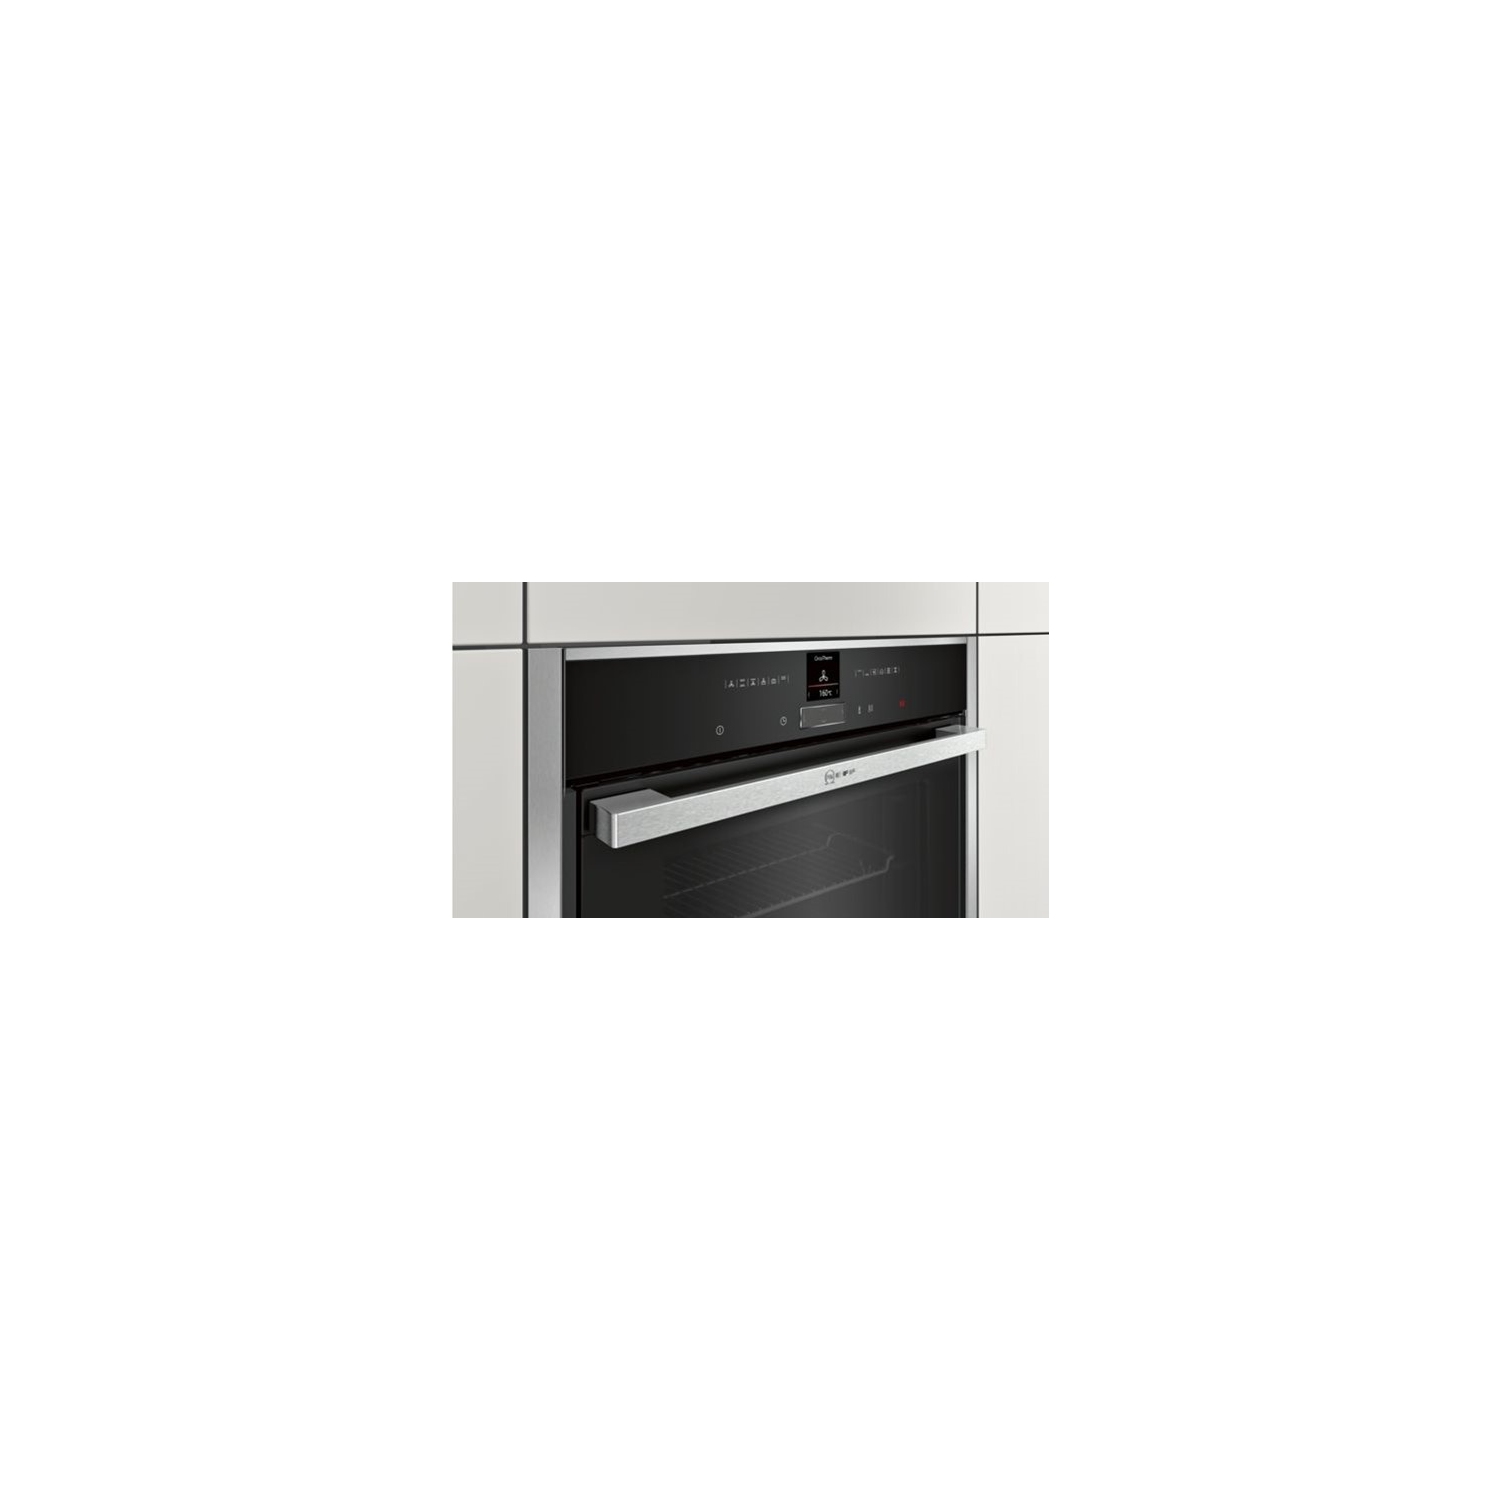 Neff B57CR22NOB Pyrolytic Slide And Hide 59.5cm Built In Oven - Stainless Steel - 6